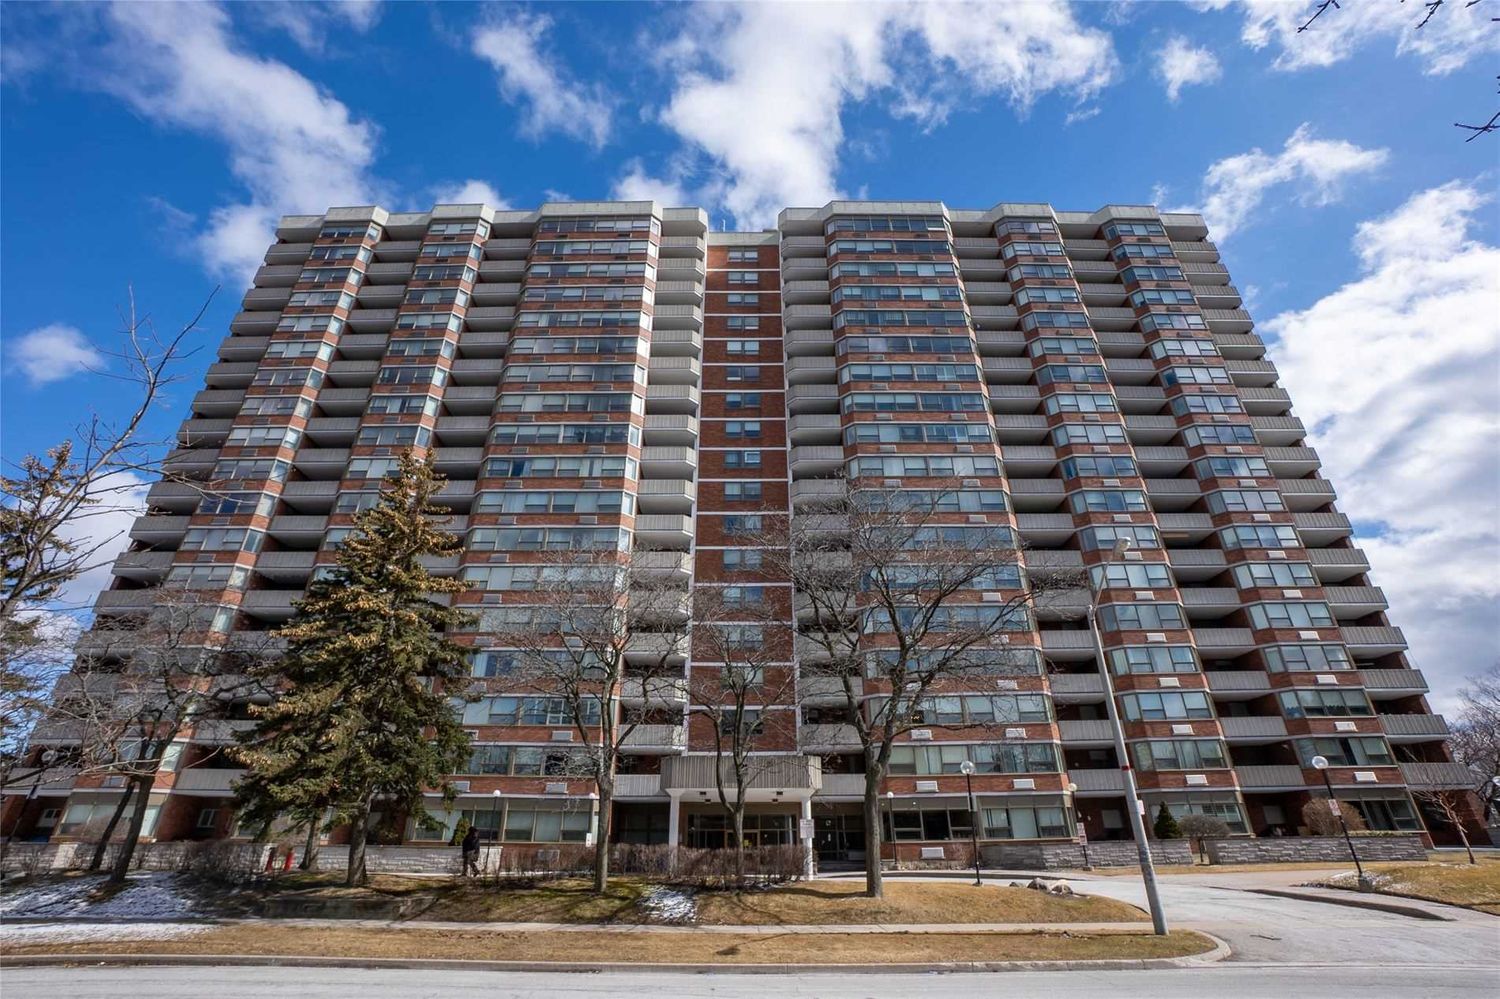 121 Ling Road. Scarborough Wood Condos is located in  Scarborough, Toronto - image #3 of 3